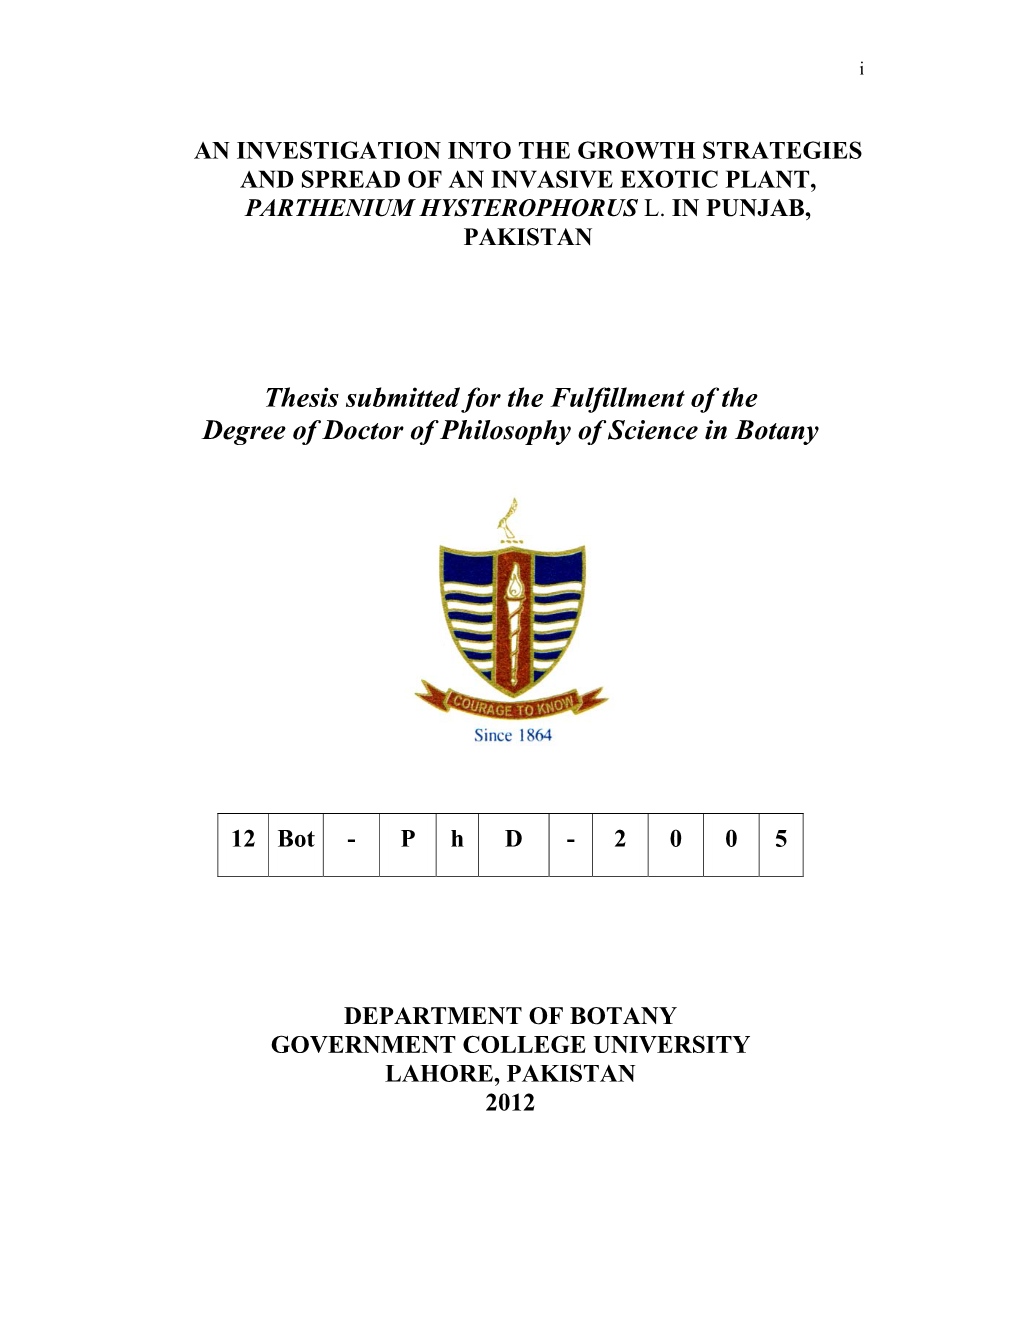 Thesis Submitted for the Fulfillment of the Degree of Doctor of Philosophy of Science in Botany